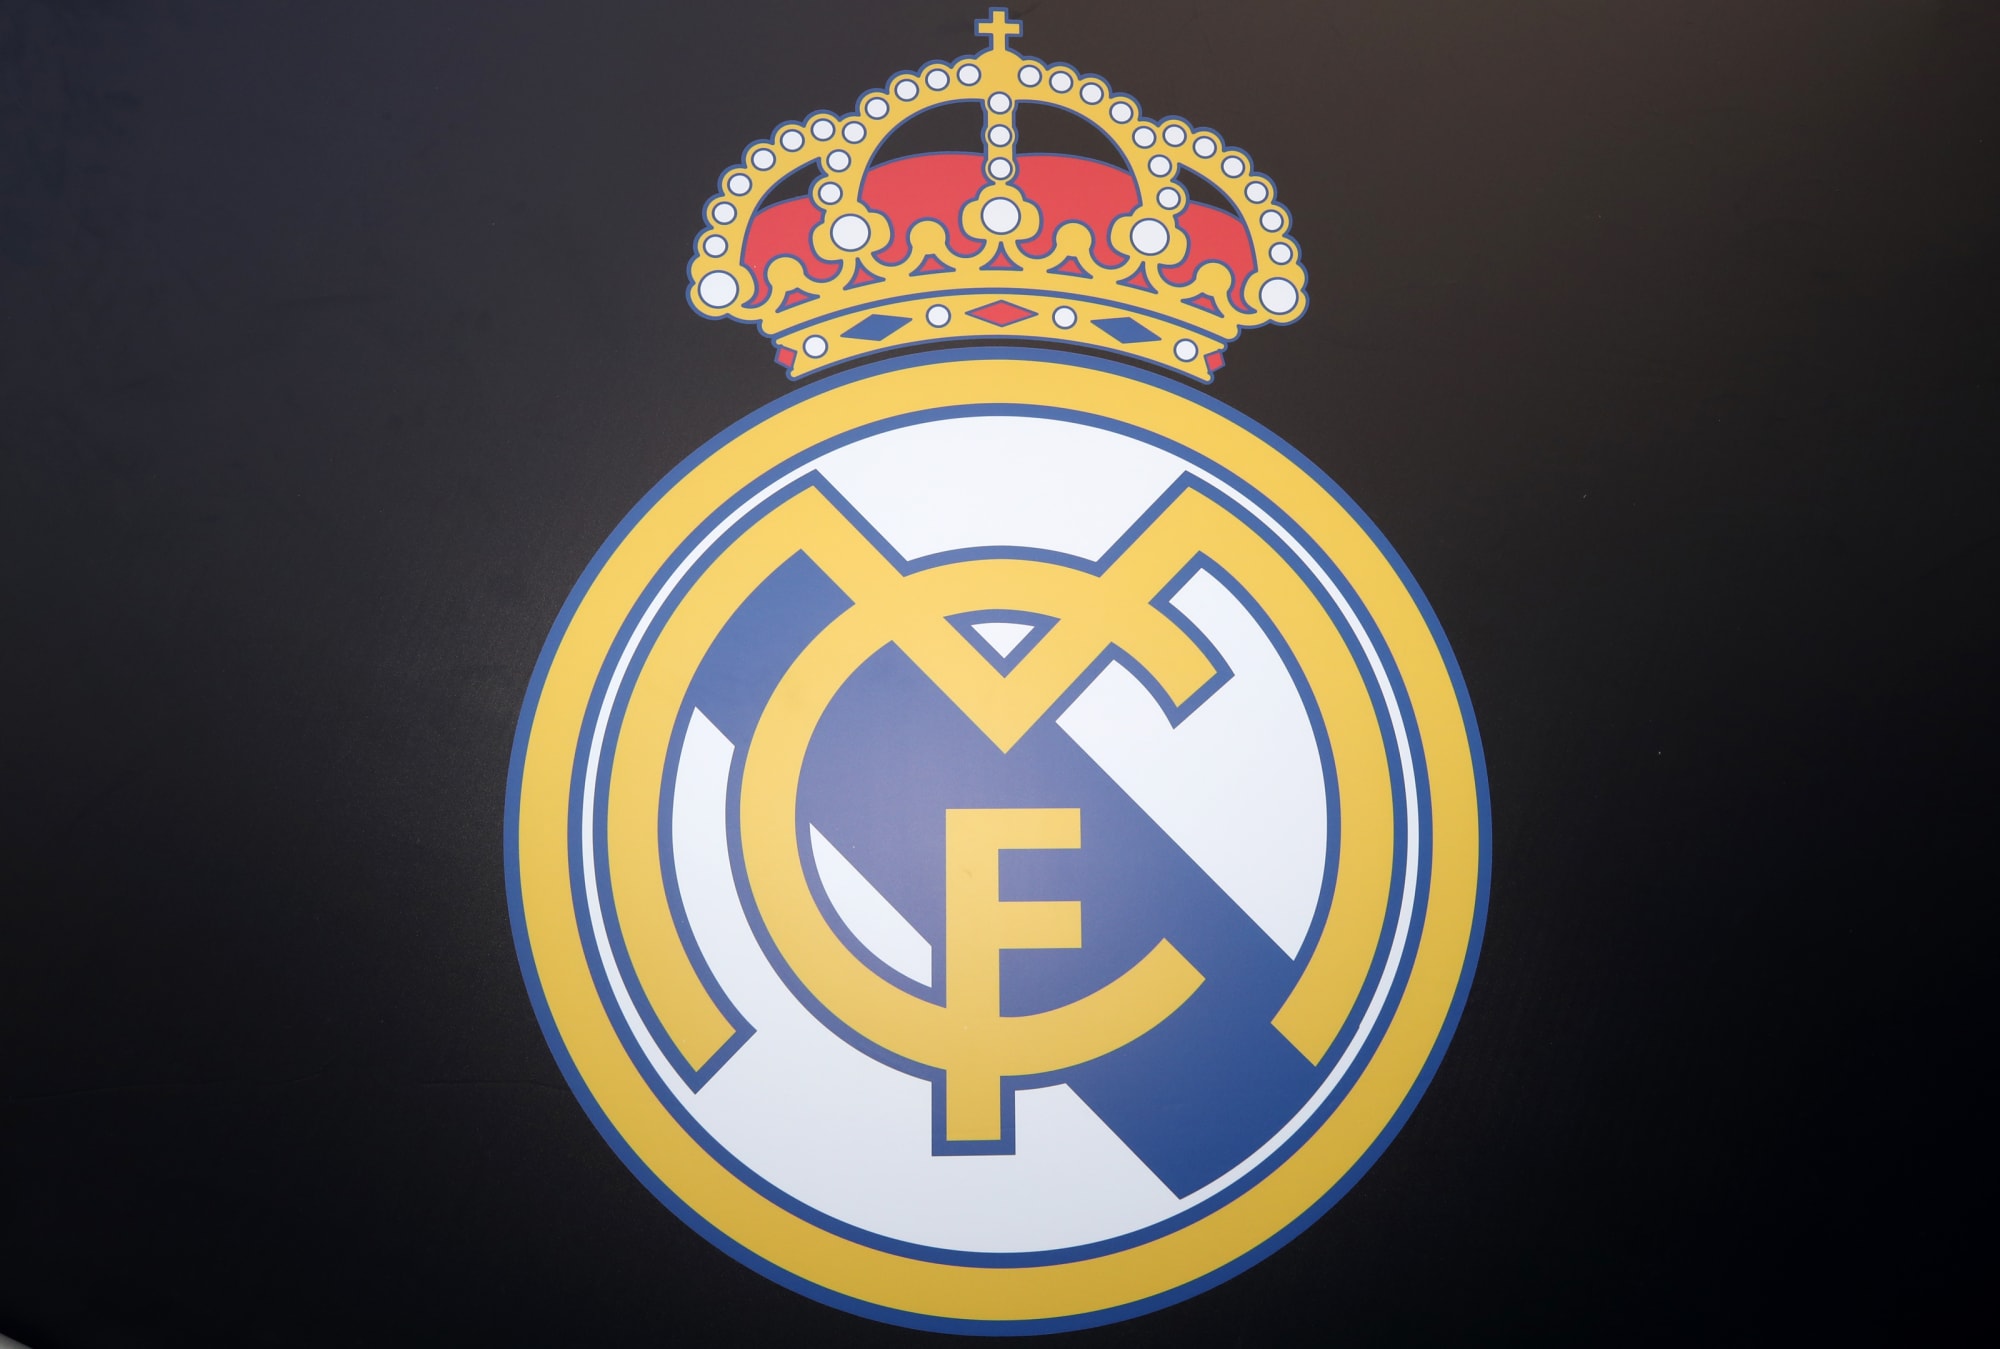 Real Madrid's 2019/2020 home and away kits have been leaked